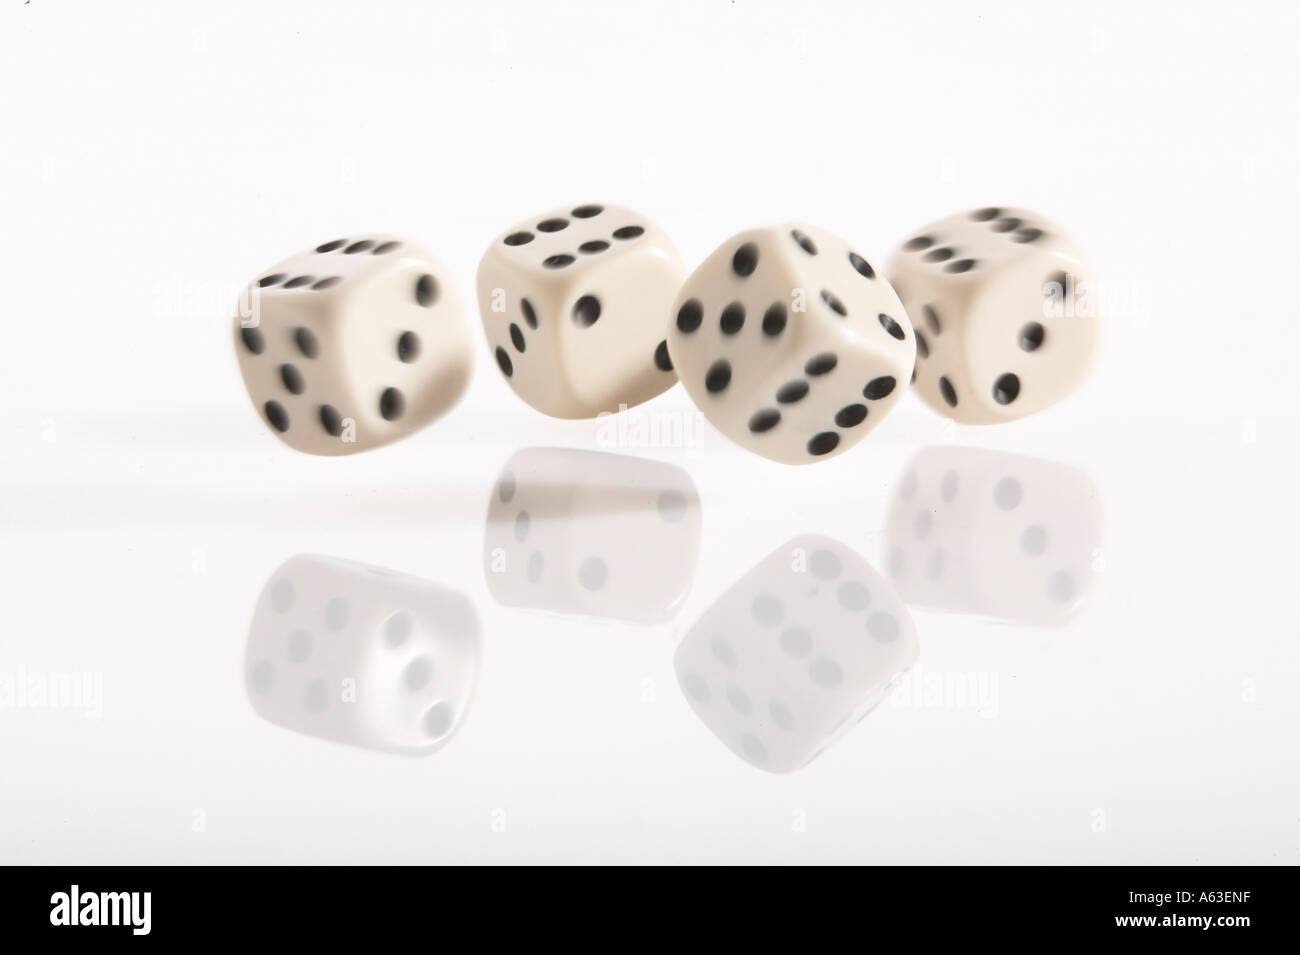 Close-up of dices Stock Photo